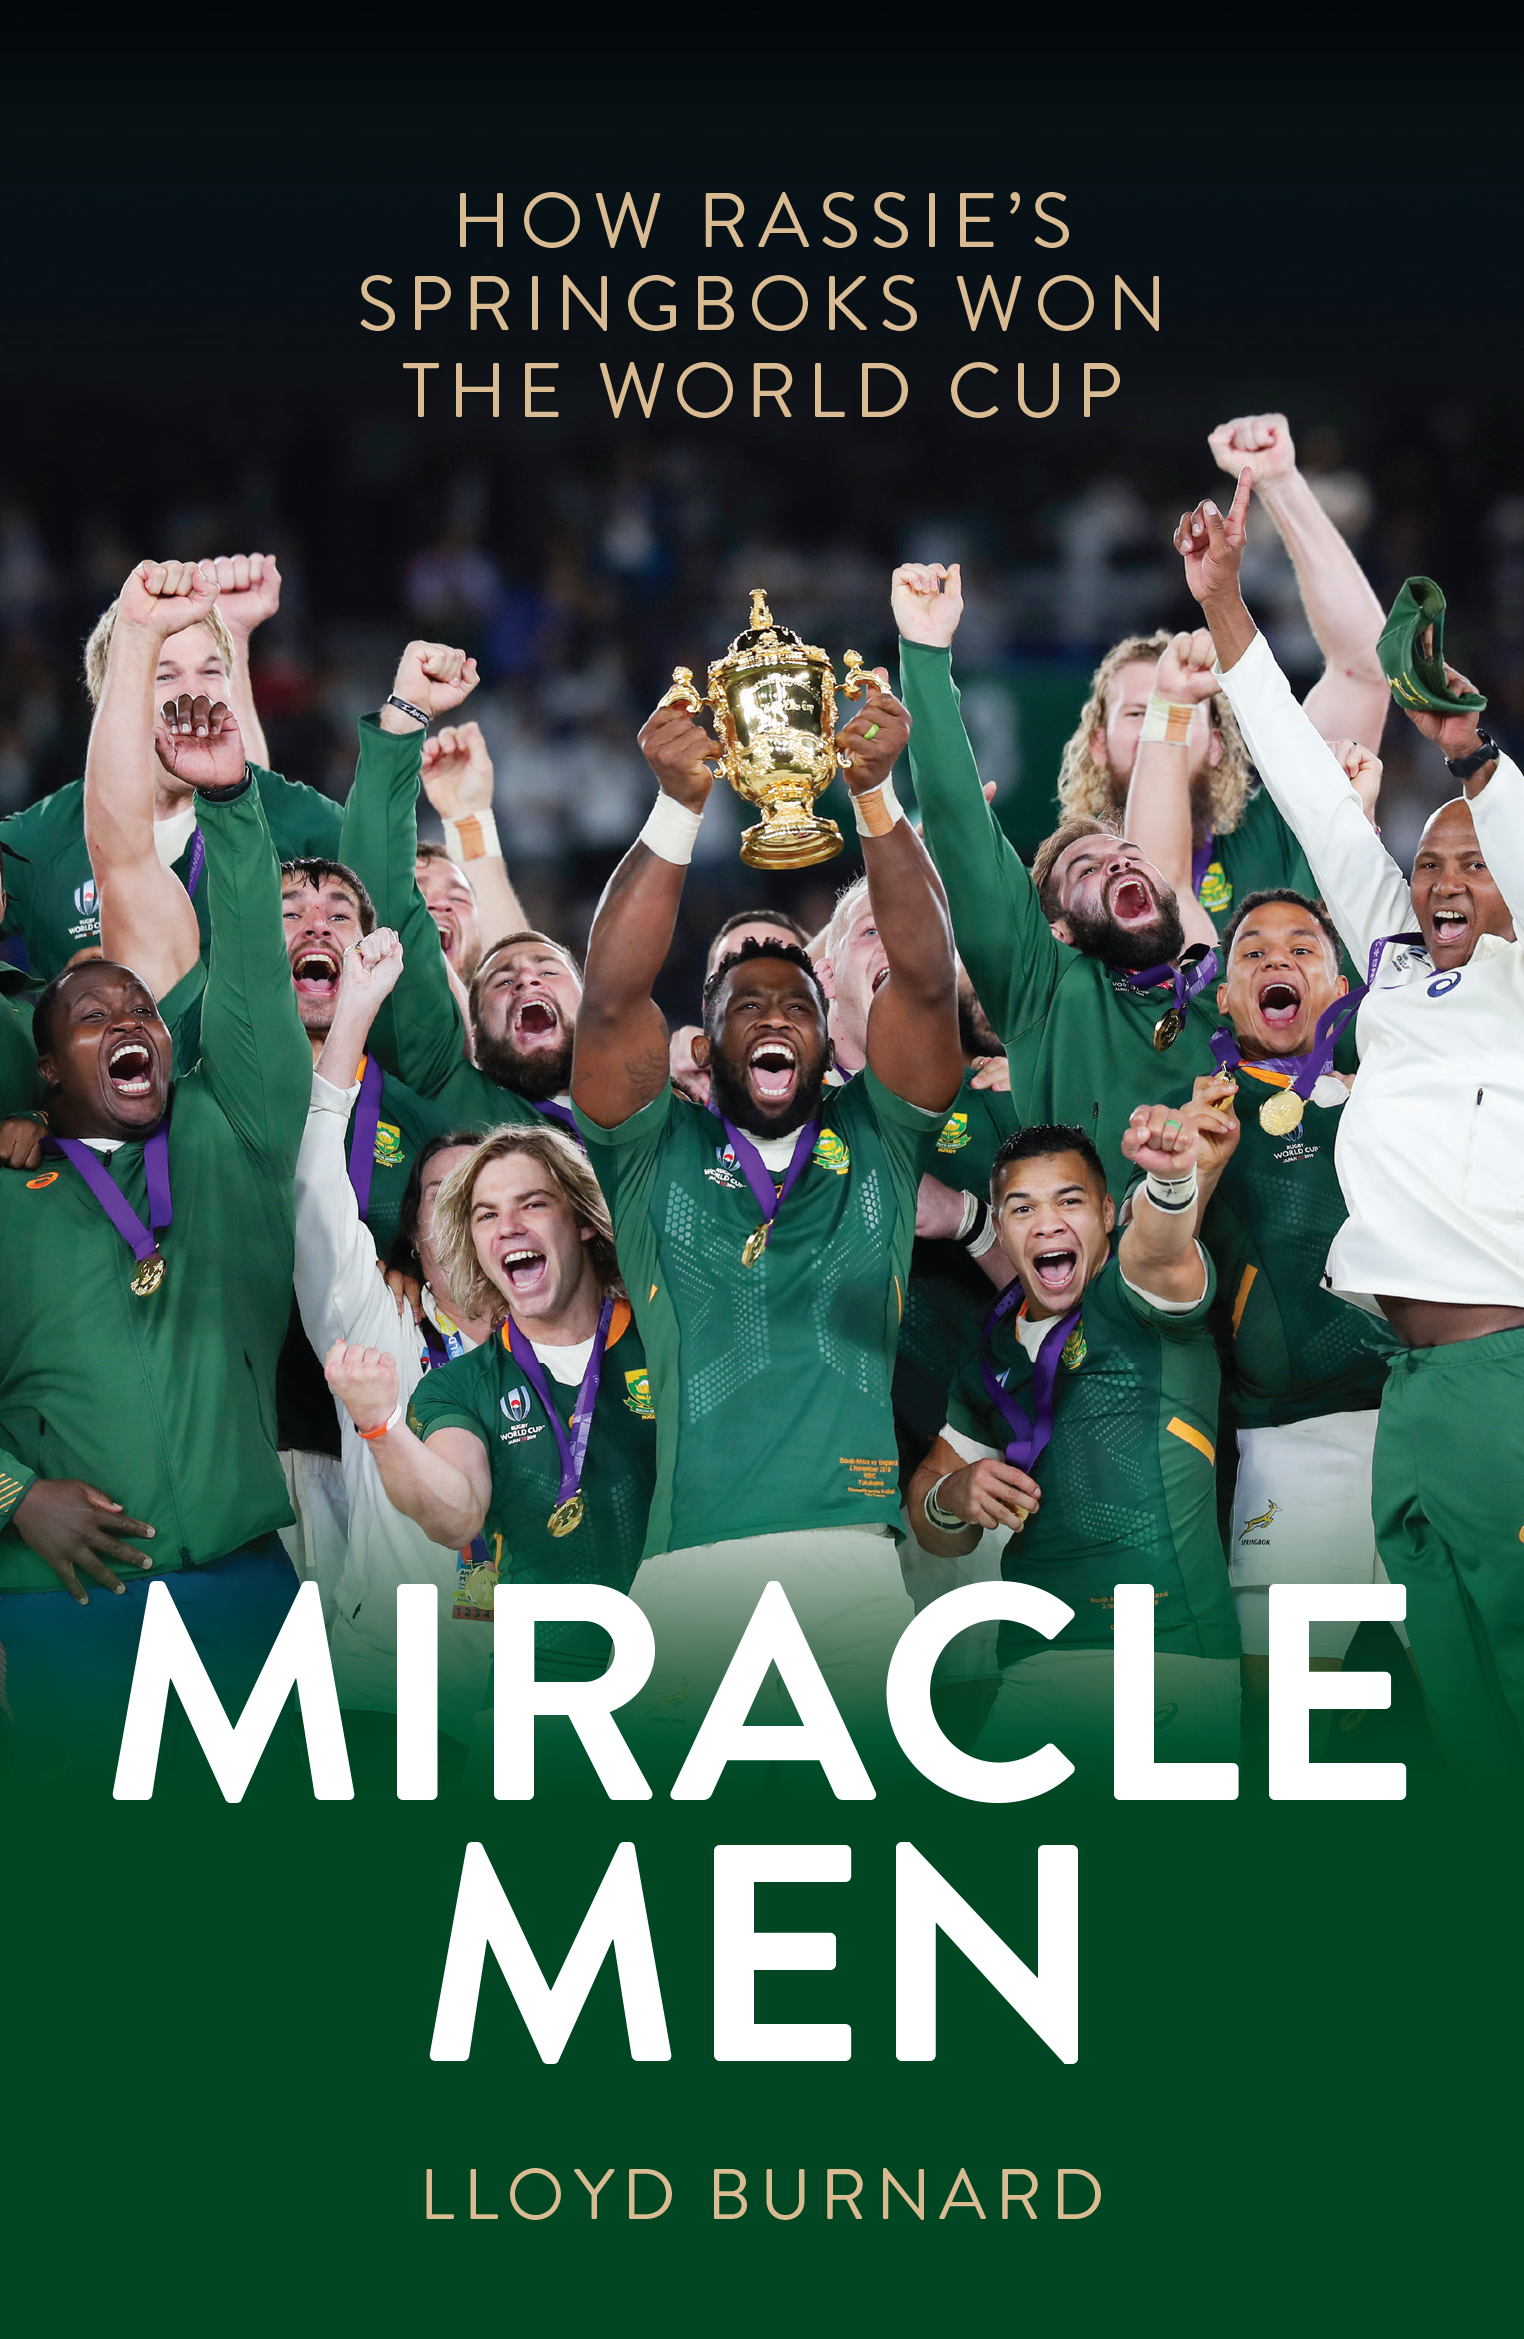 Miracle Men: How Rassie’s Springboks won the World Cup